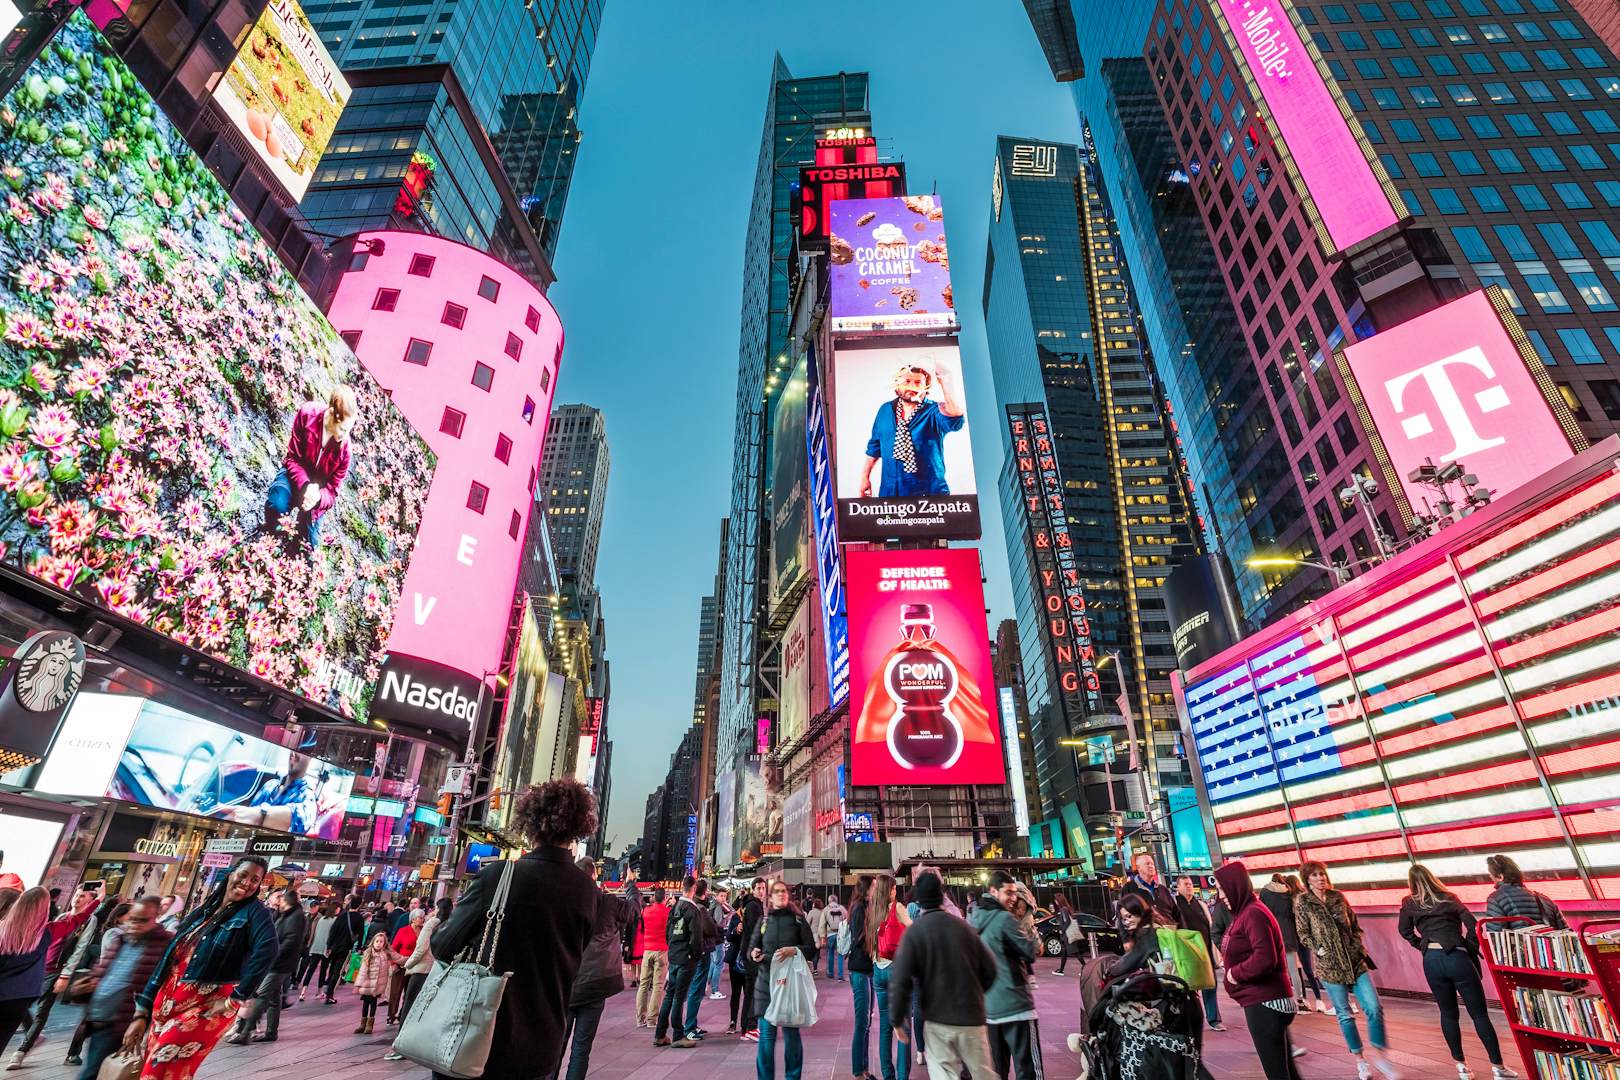 APRIL 23, 2018: The architecture of Times Square with its neon billboards, stores, and many tourists at dusk.